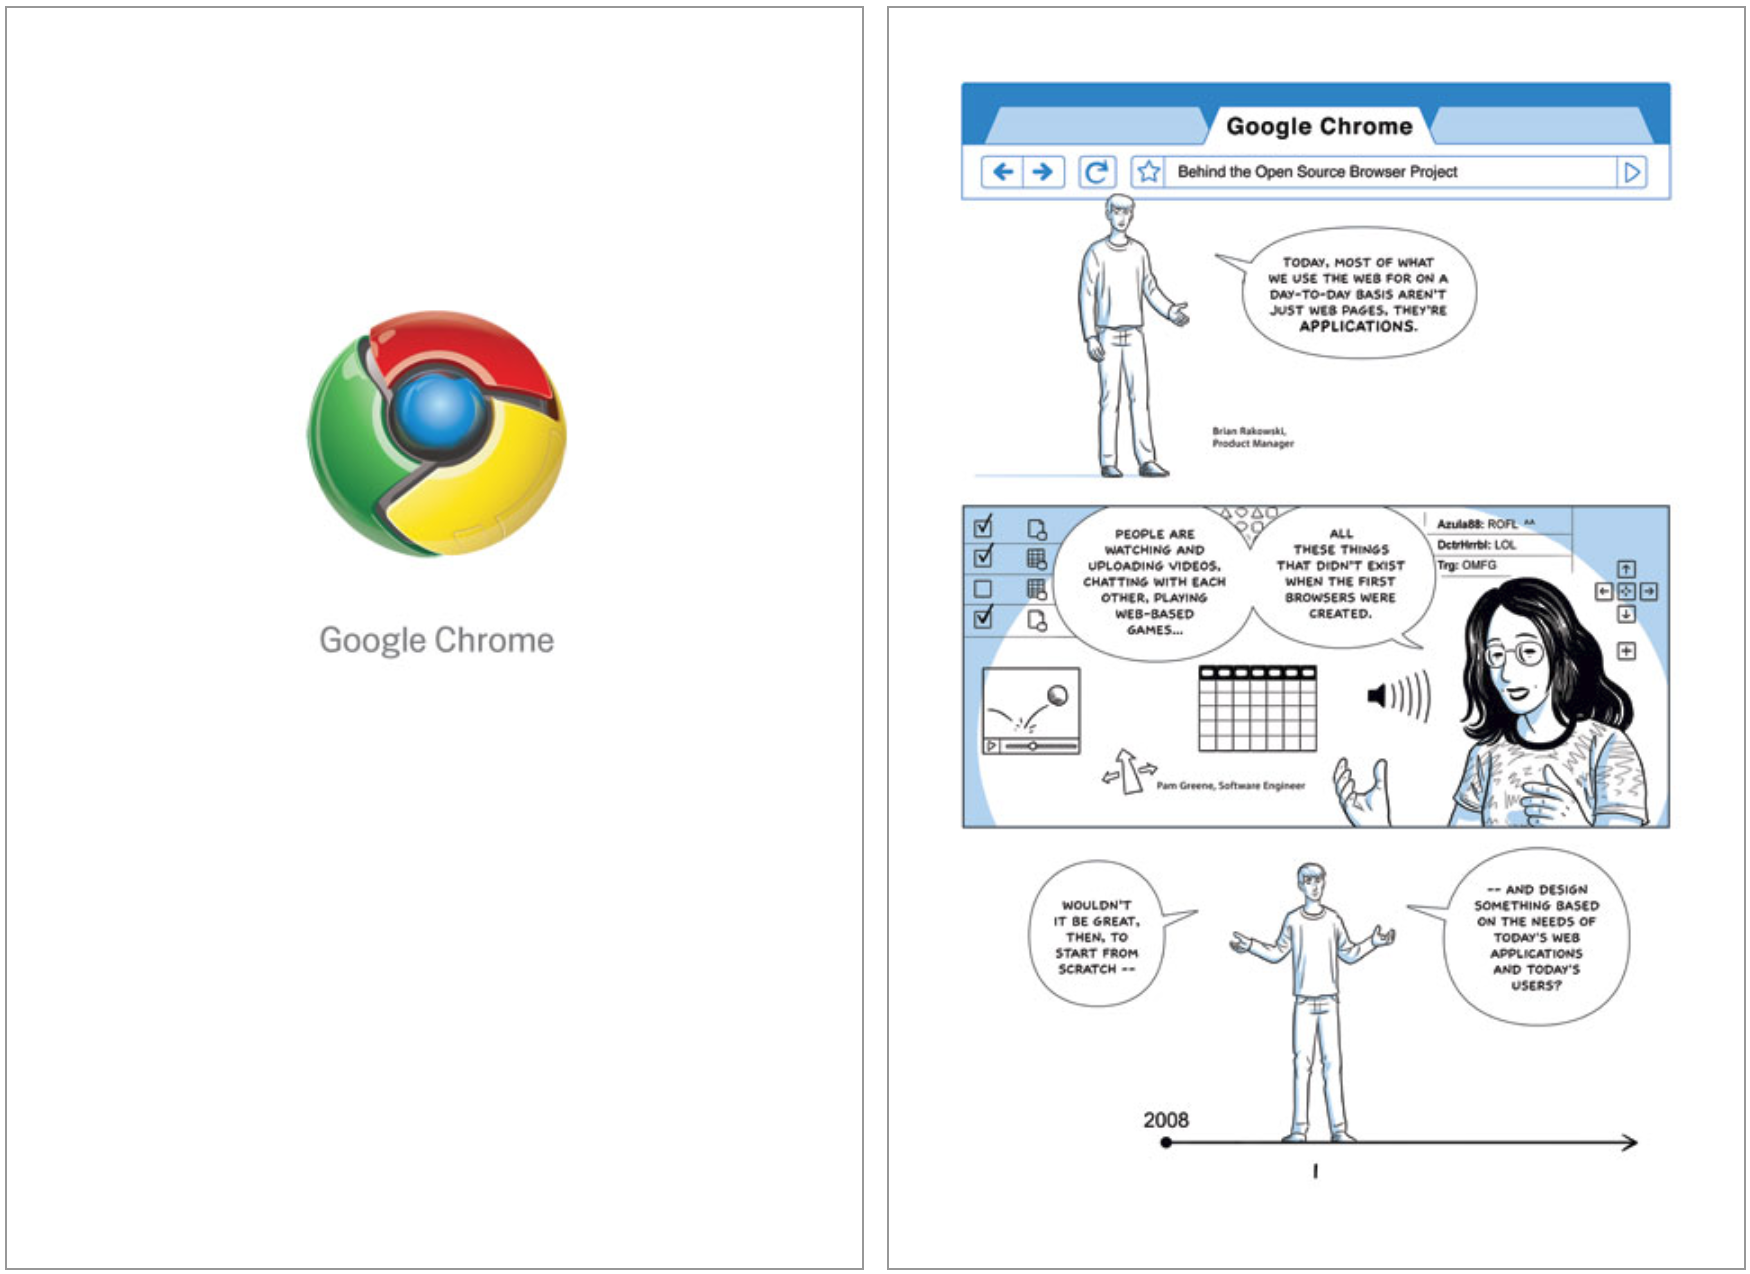 Google Chrome is celebrating its 10th birthday with this awesome